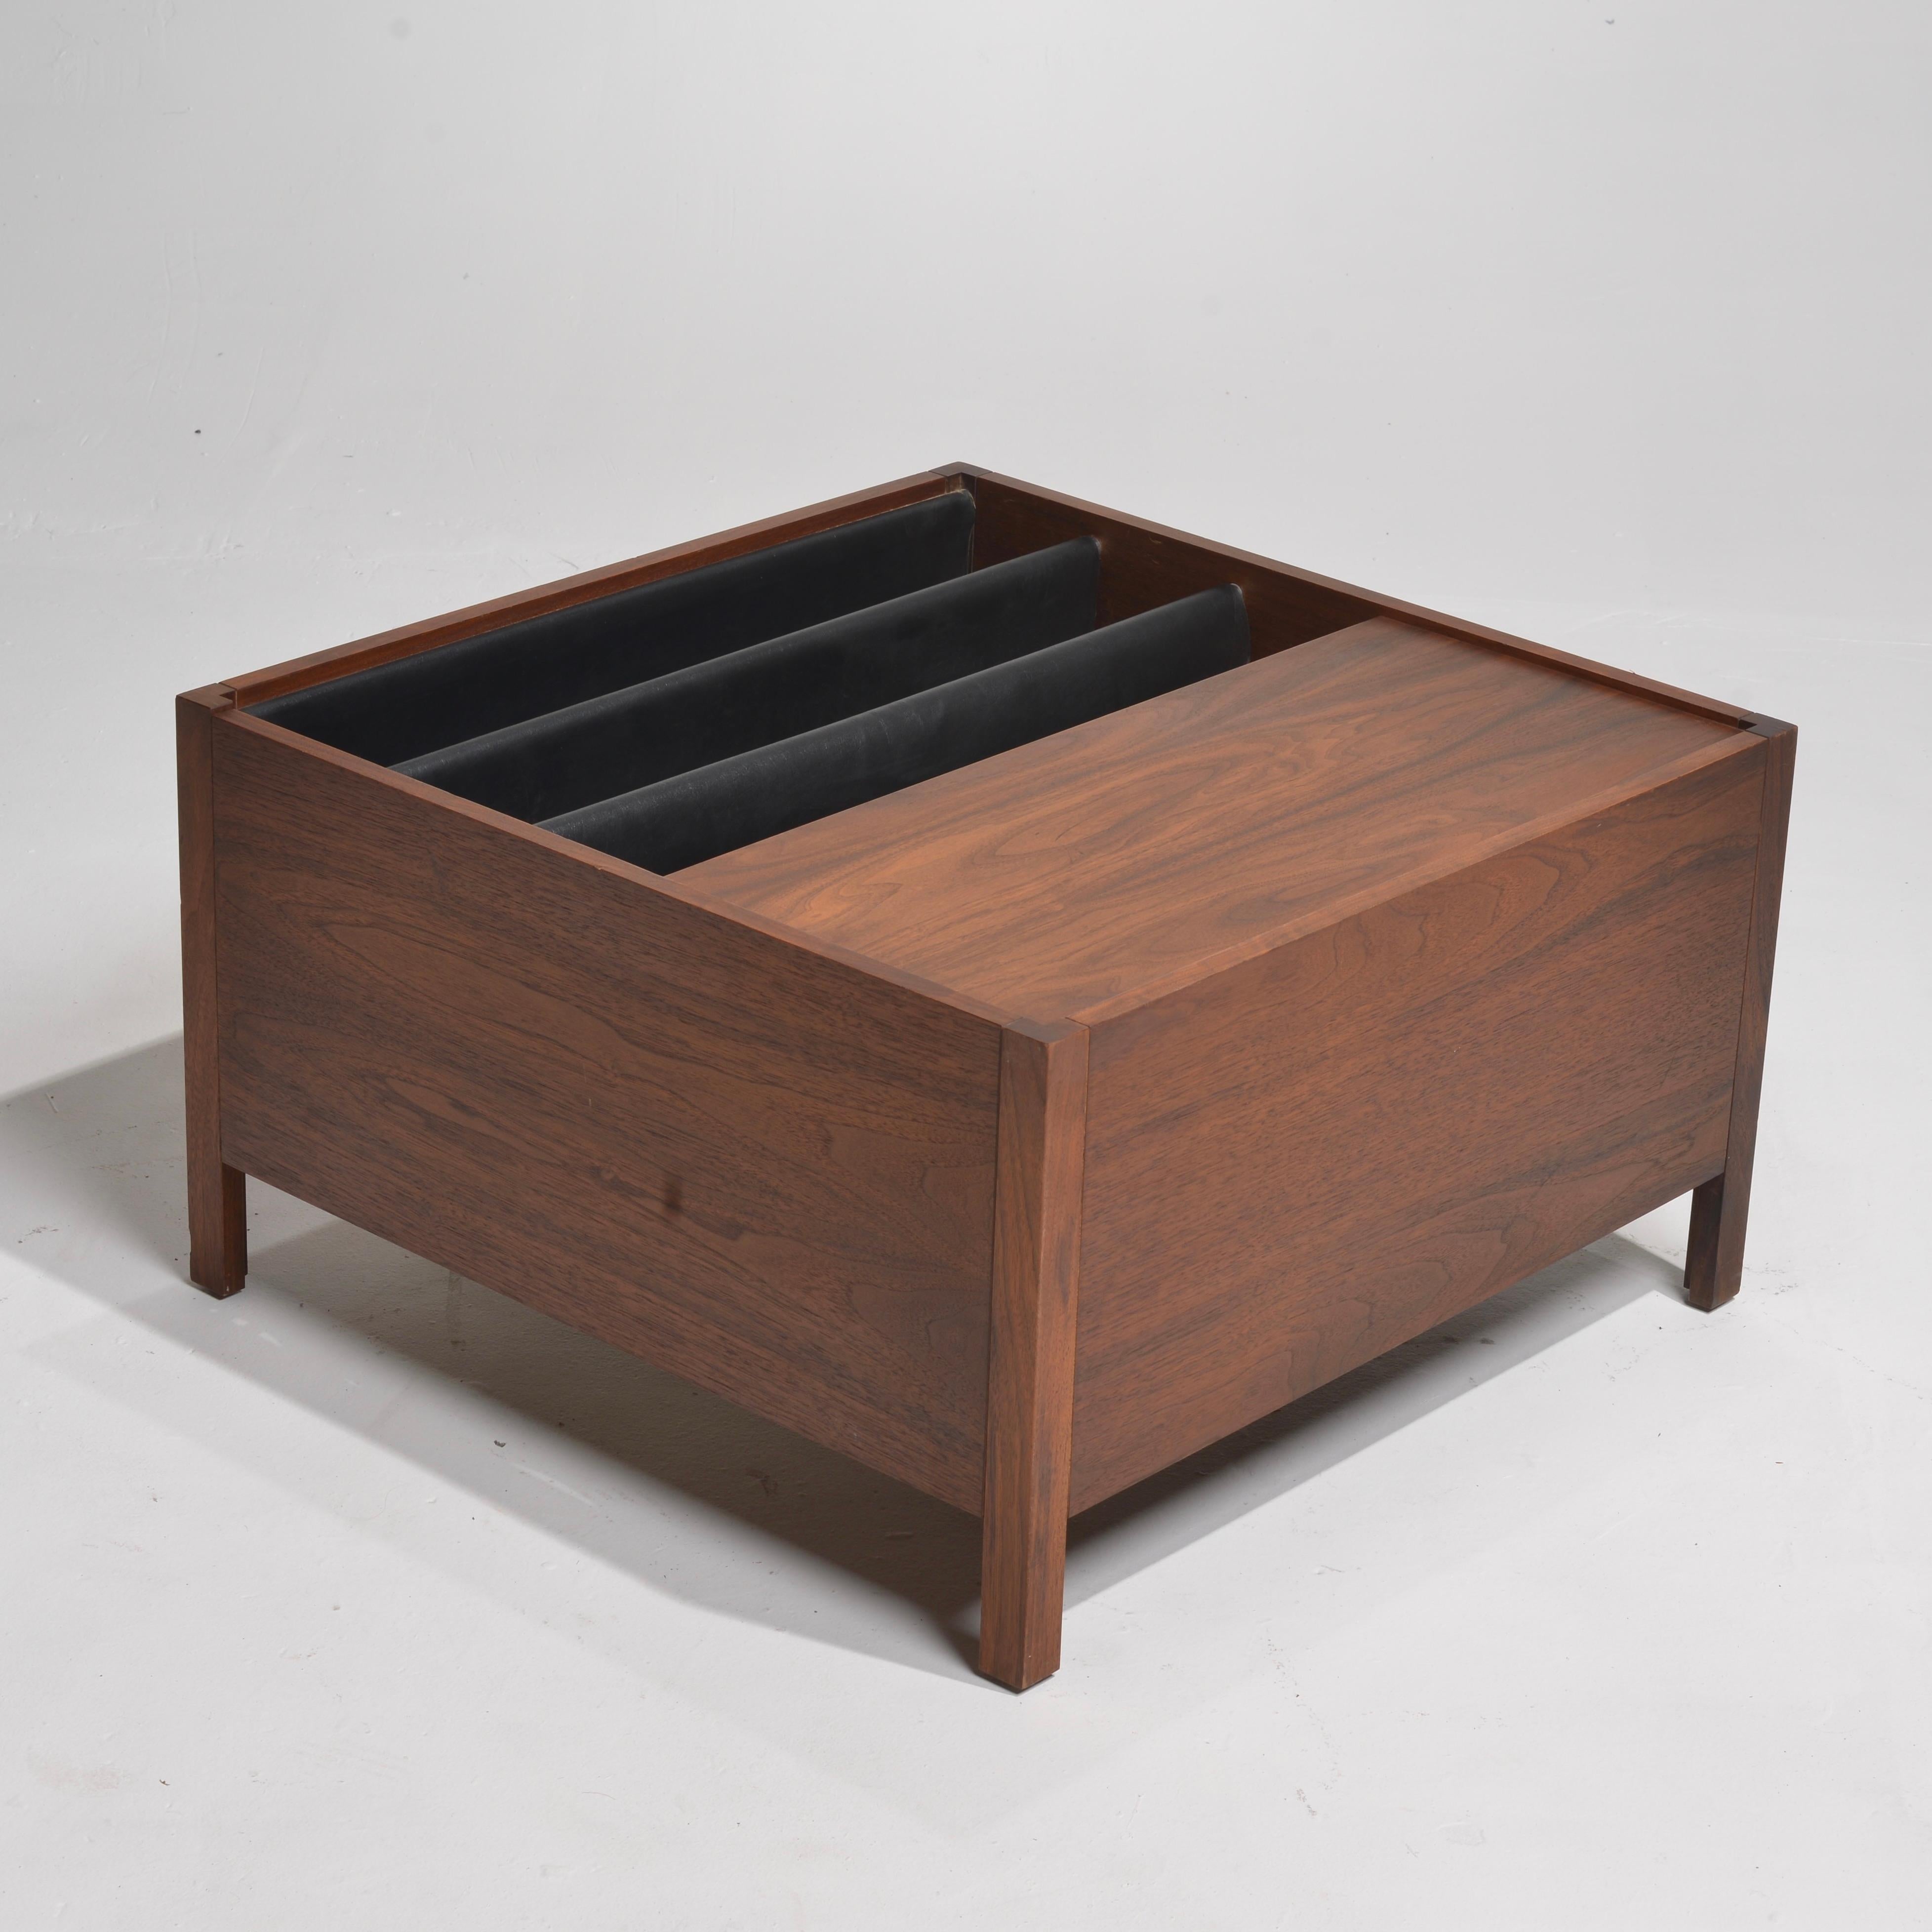 Gorgeous square walnut table in the Mid-Century Modern style with compartment featuring soft black leather dividers for books, magazines, or records. The storage compartment measures 12 inches deep and is separated into three sections.